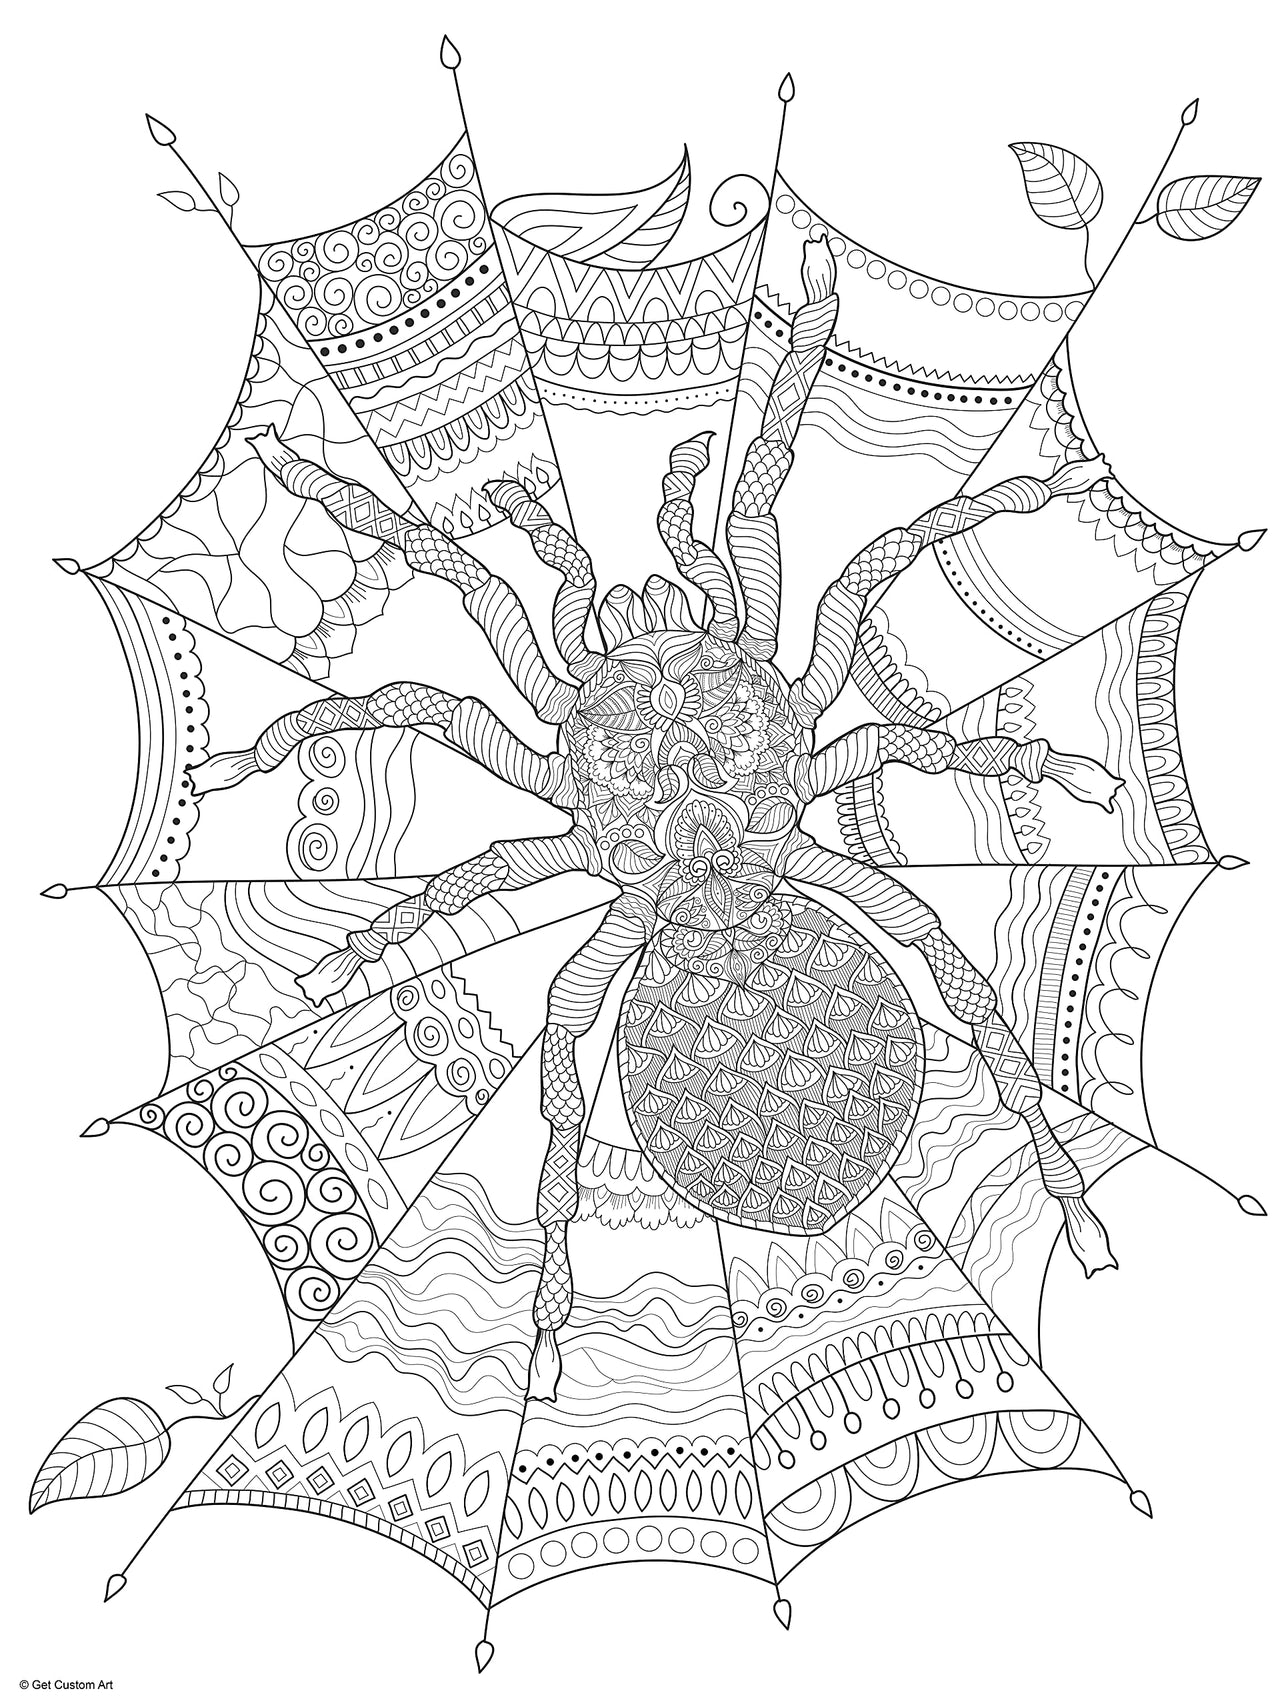 Spider and Web Coloring Poster – Arachnid Art for Kids and Adults | DIY Stress Relief Coloring Poster